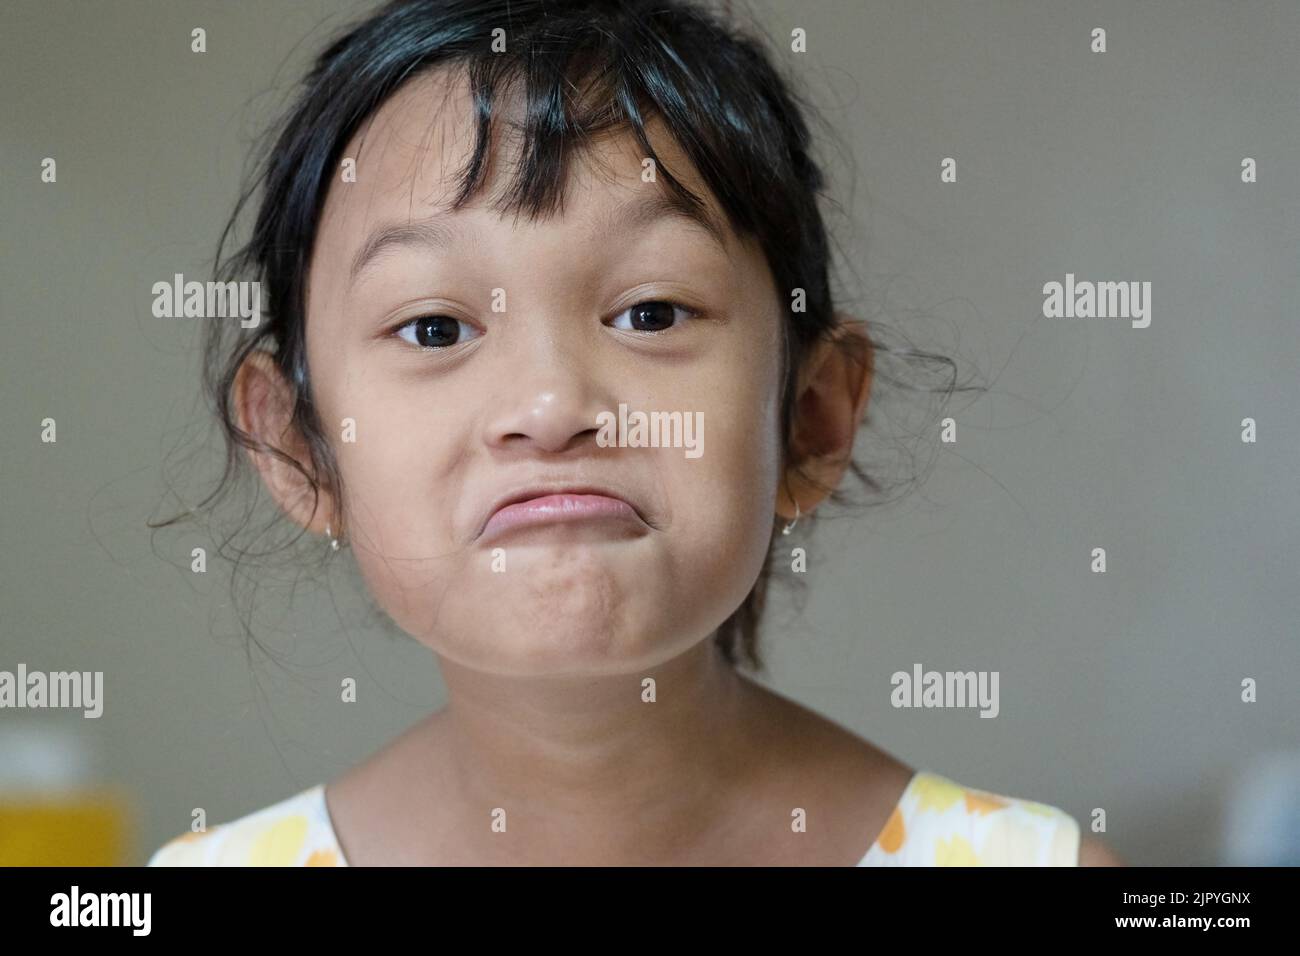 Happy cute asian girl Child looks at the camera and makes a funny ...